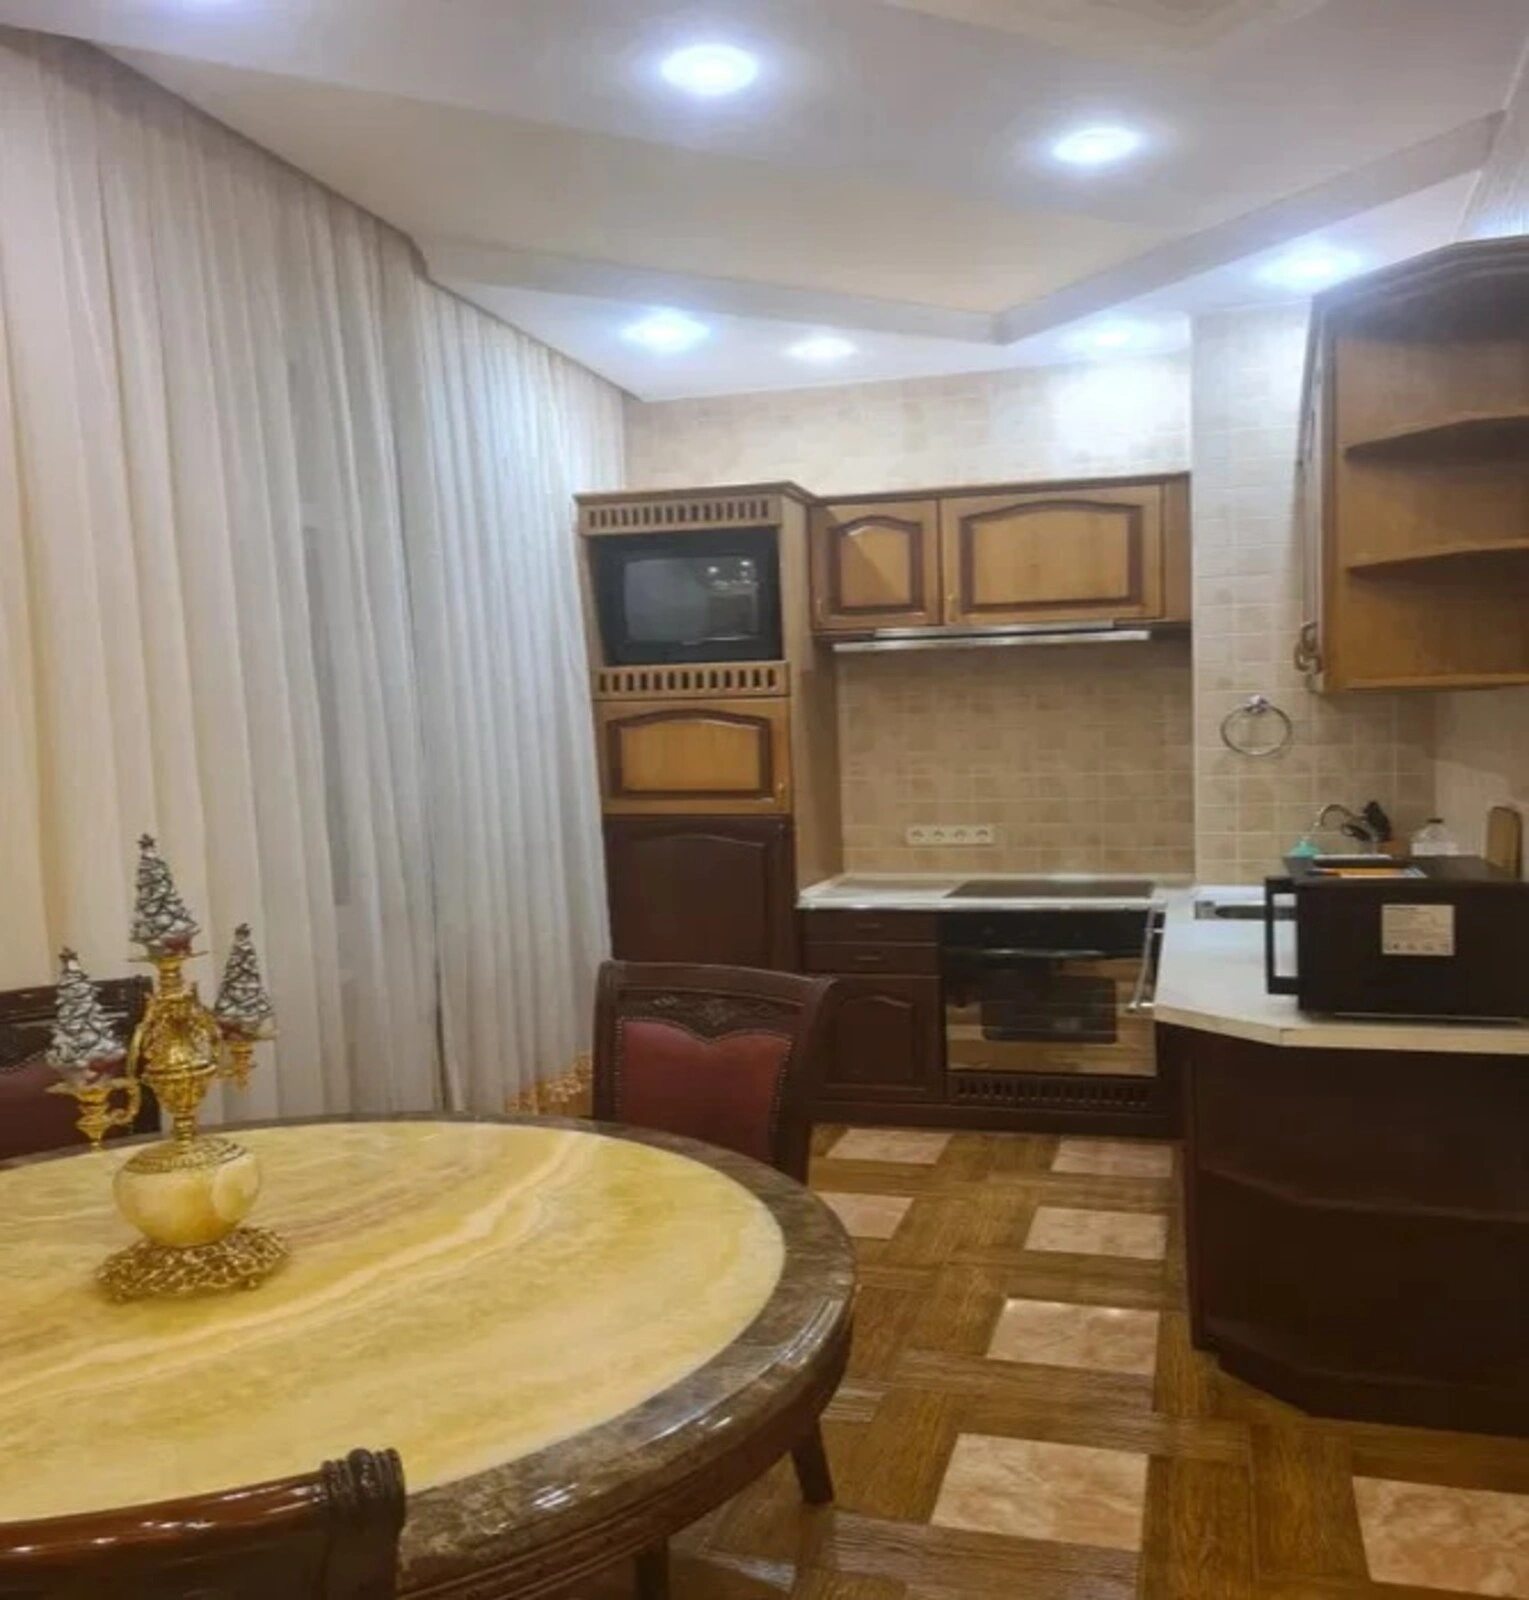 Apartment for rent. 2 rooms, 53 m², 3rd floor/5 floors. Karla Marksa , Dnipro. 